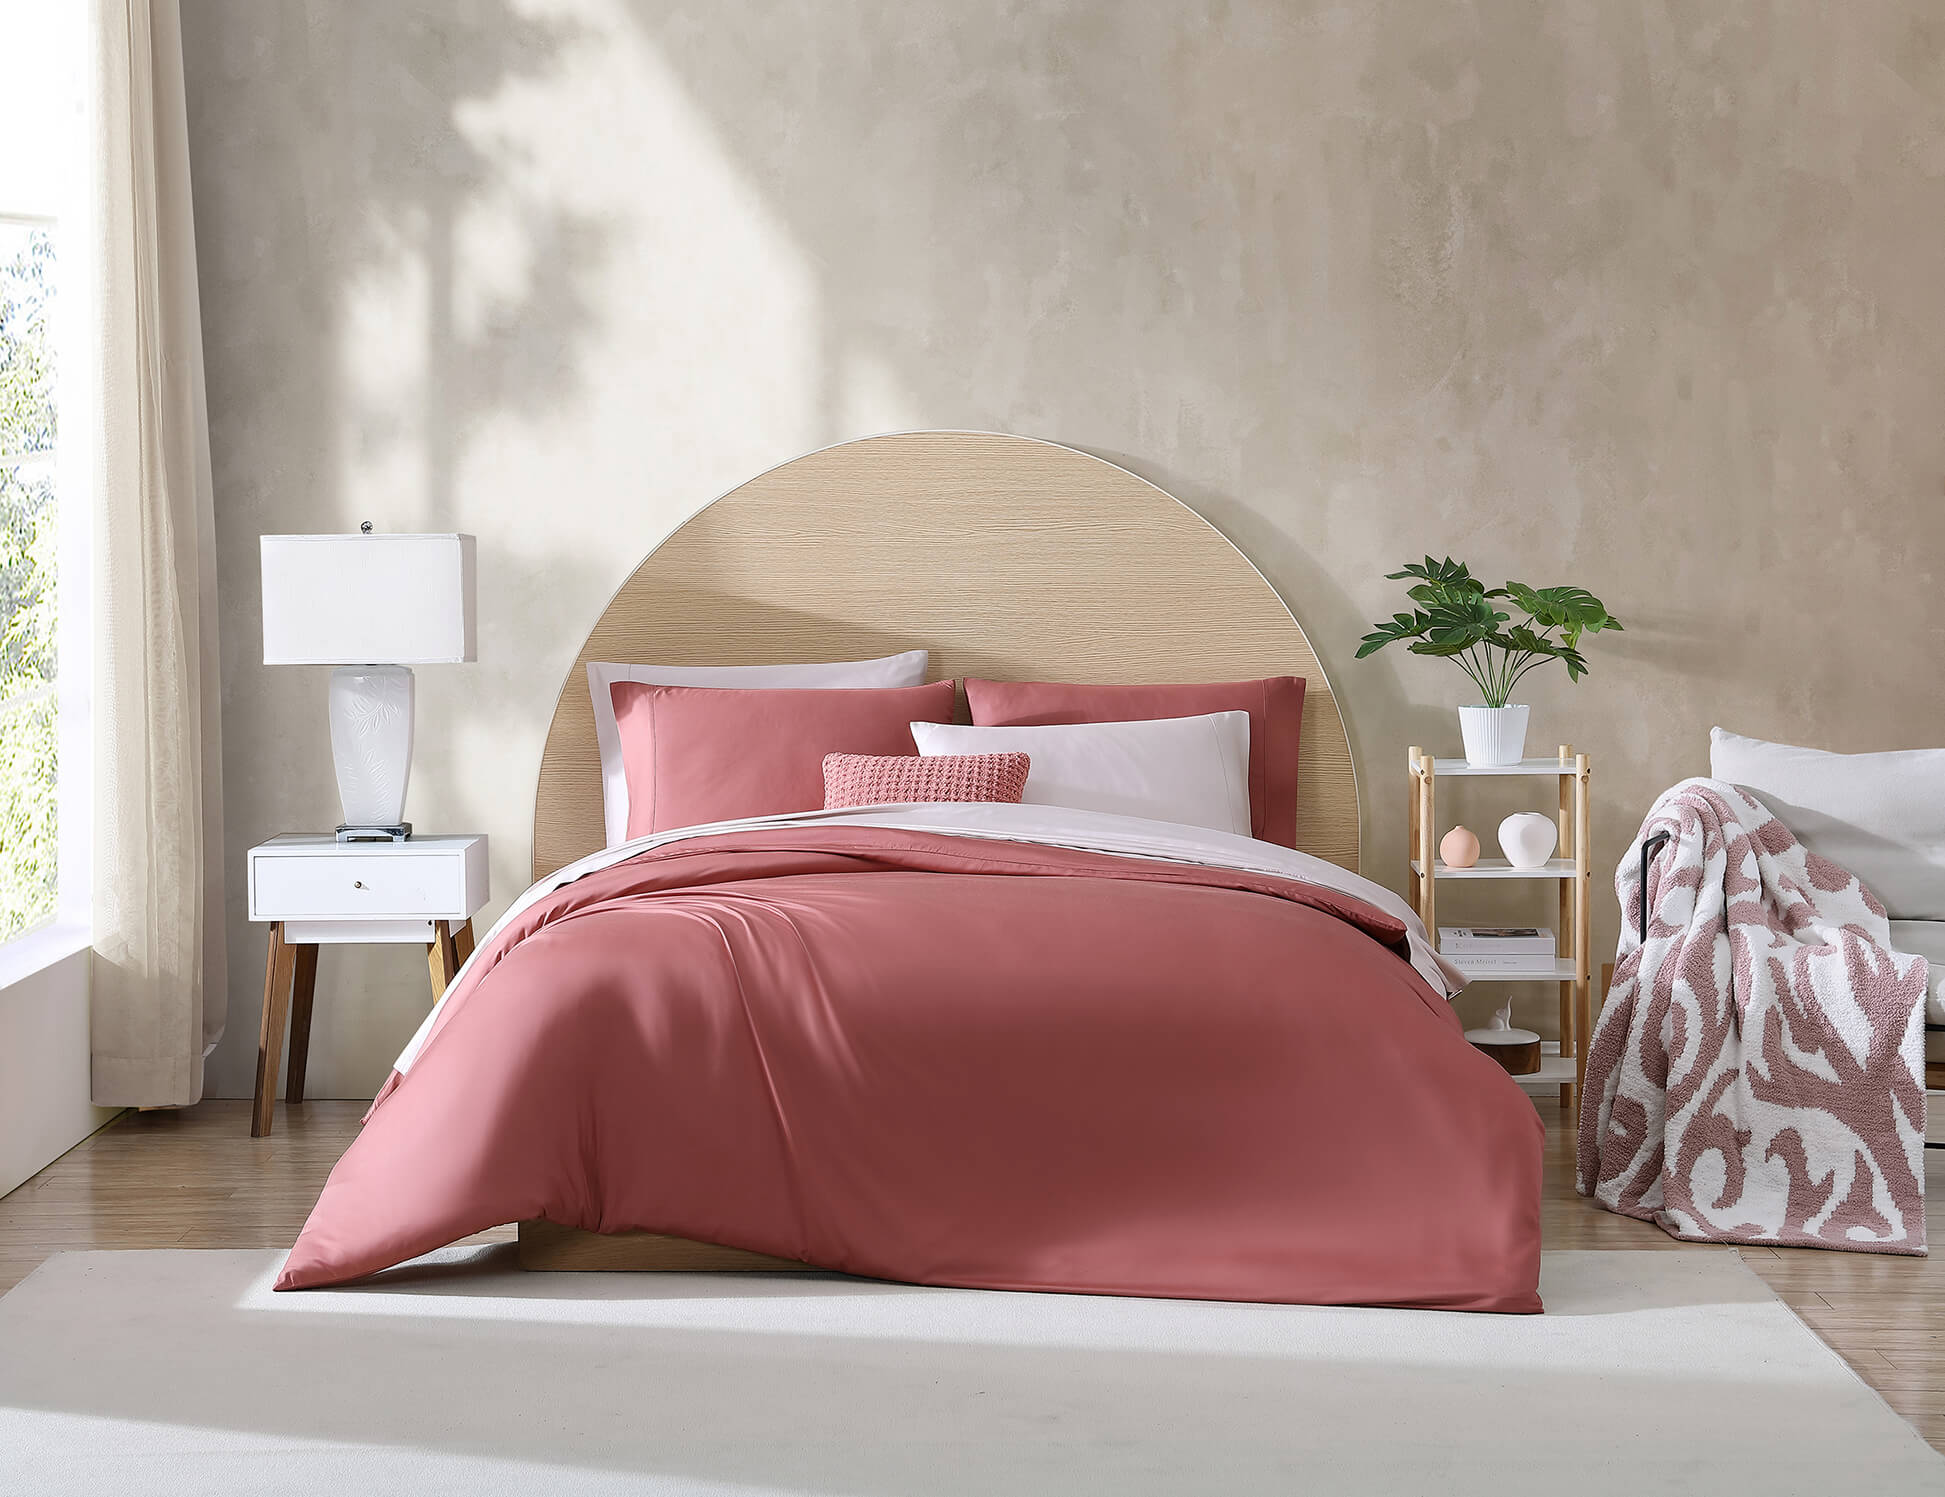 Bed Sytles: European Style Bed Making vs. Scandinavian Style Bed Making on this image we have a pink duvet on a bed with pink and white pillows.